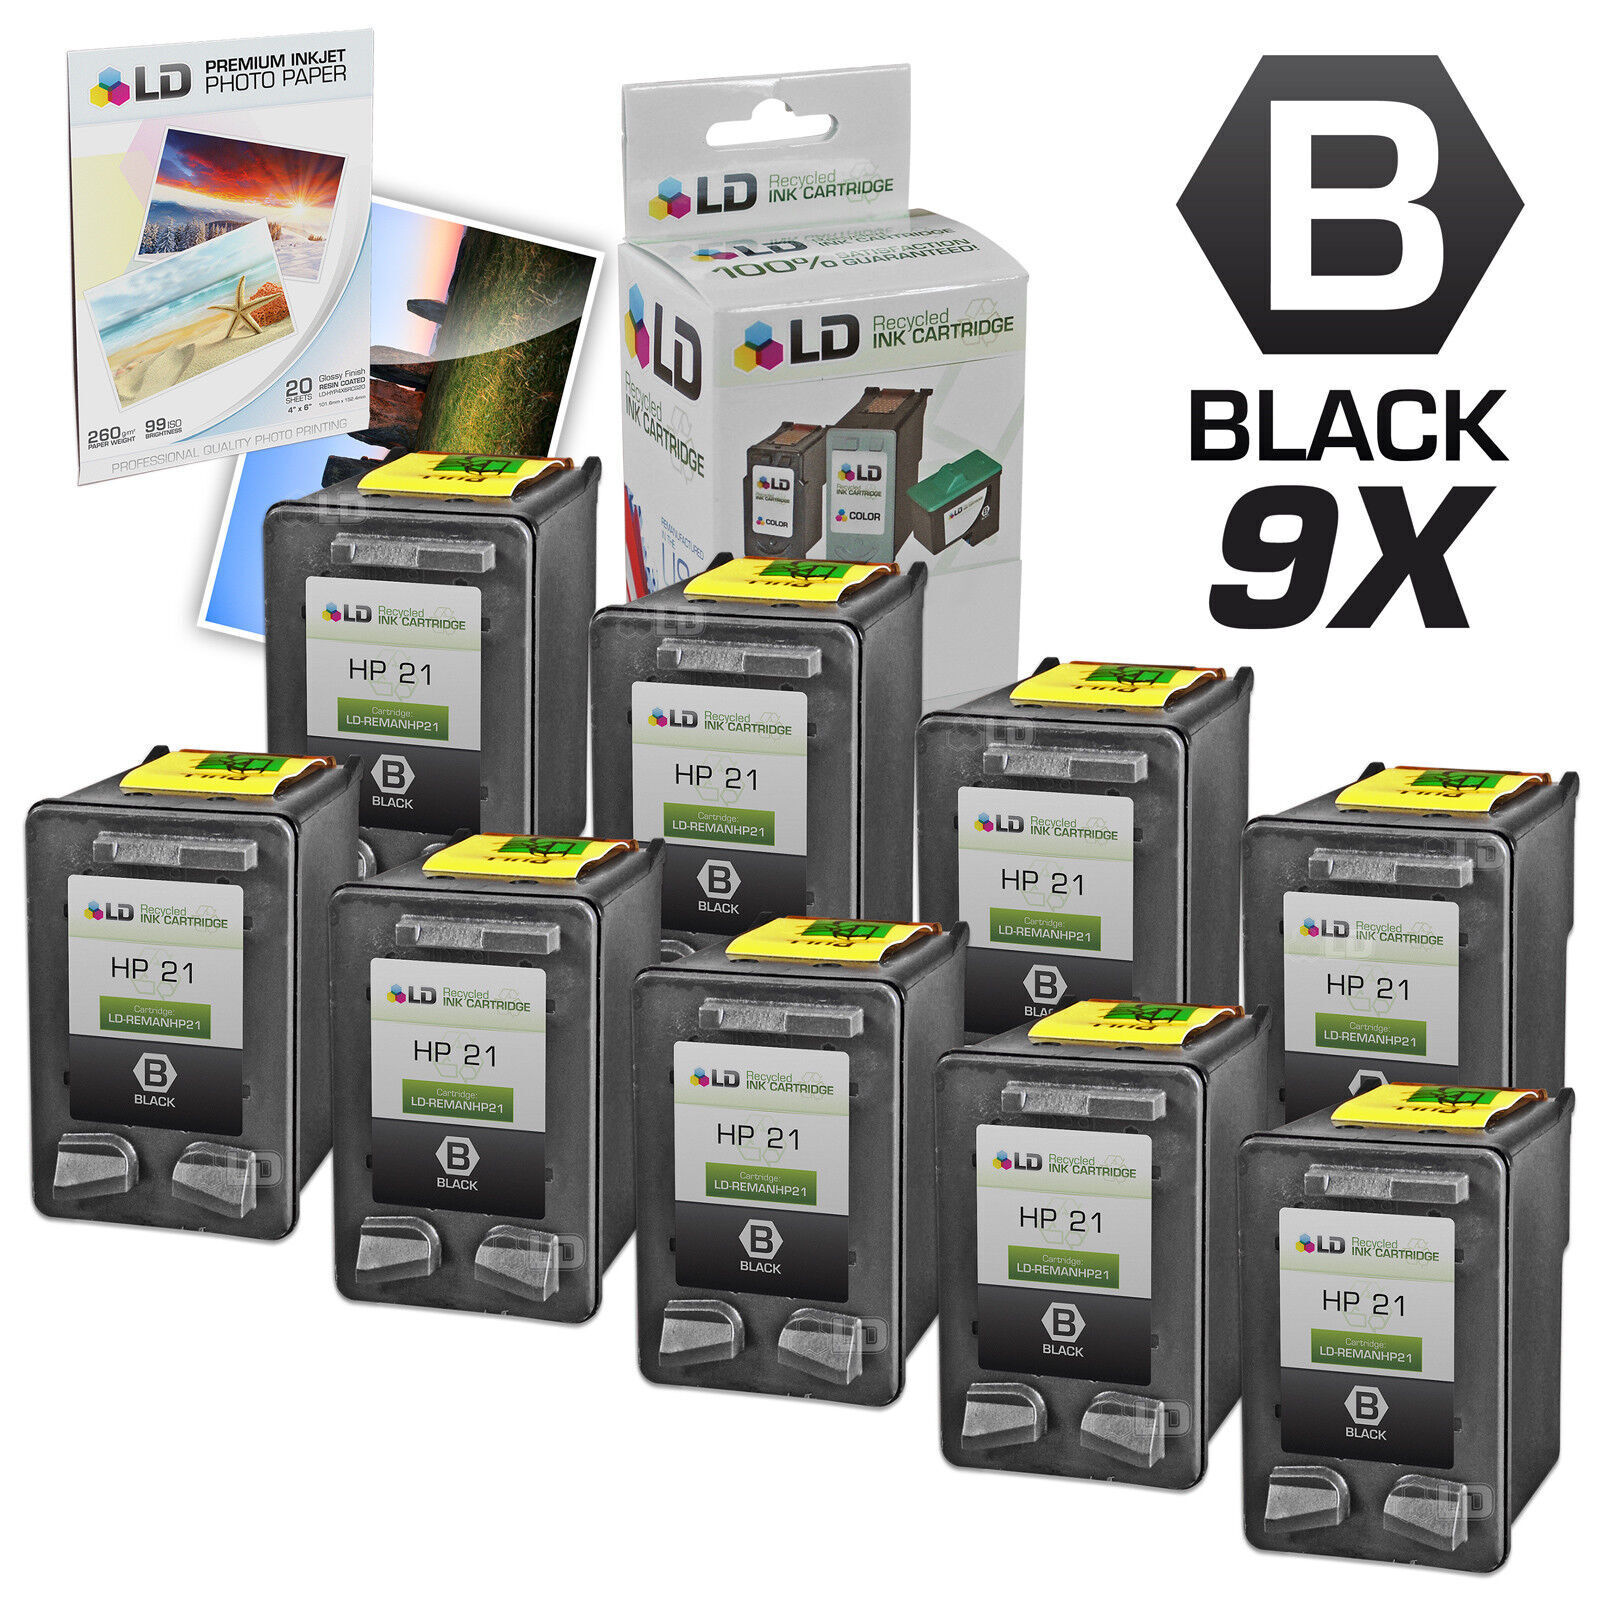 LD Products Replacement Ink Cartridges for HP 21 C9351AN Black 9pk